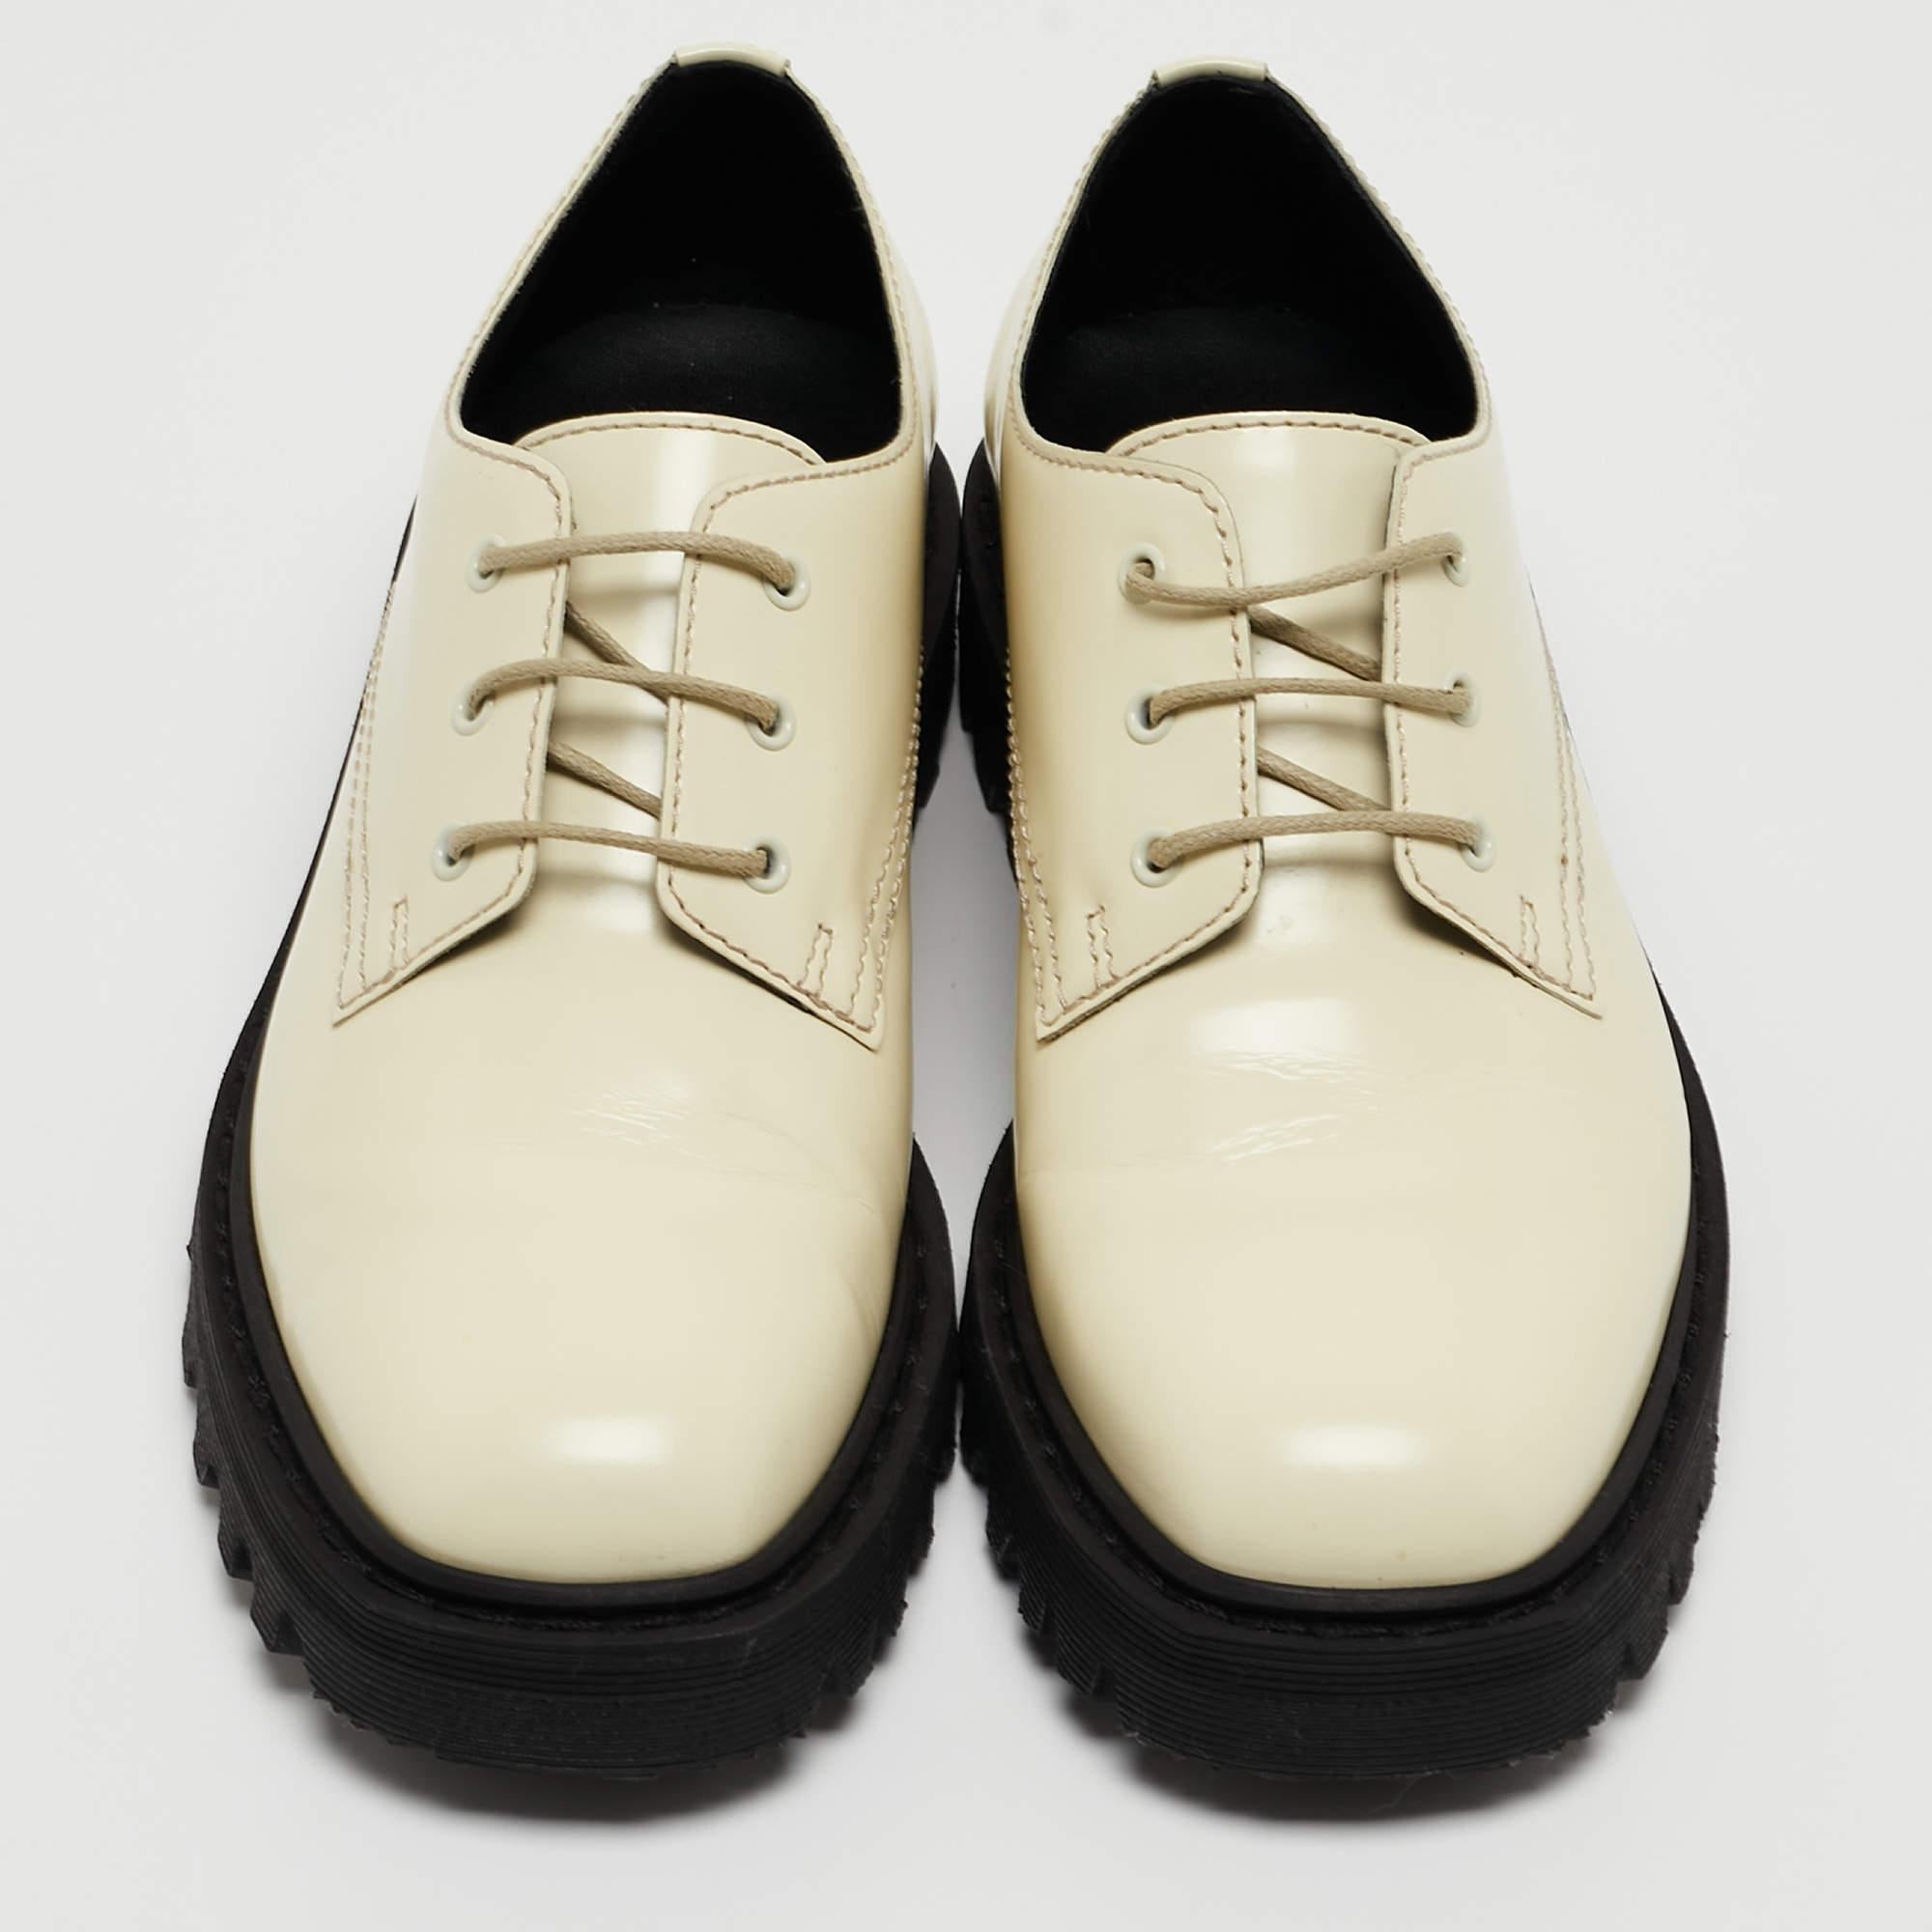 Give your outfit a luxe update with this pair of The Row derby shoes. The shoes are sewn perfectly to help you make a statement in them for a long time.

Includes: Original Dustbag, Original Box

